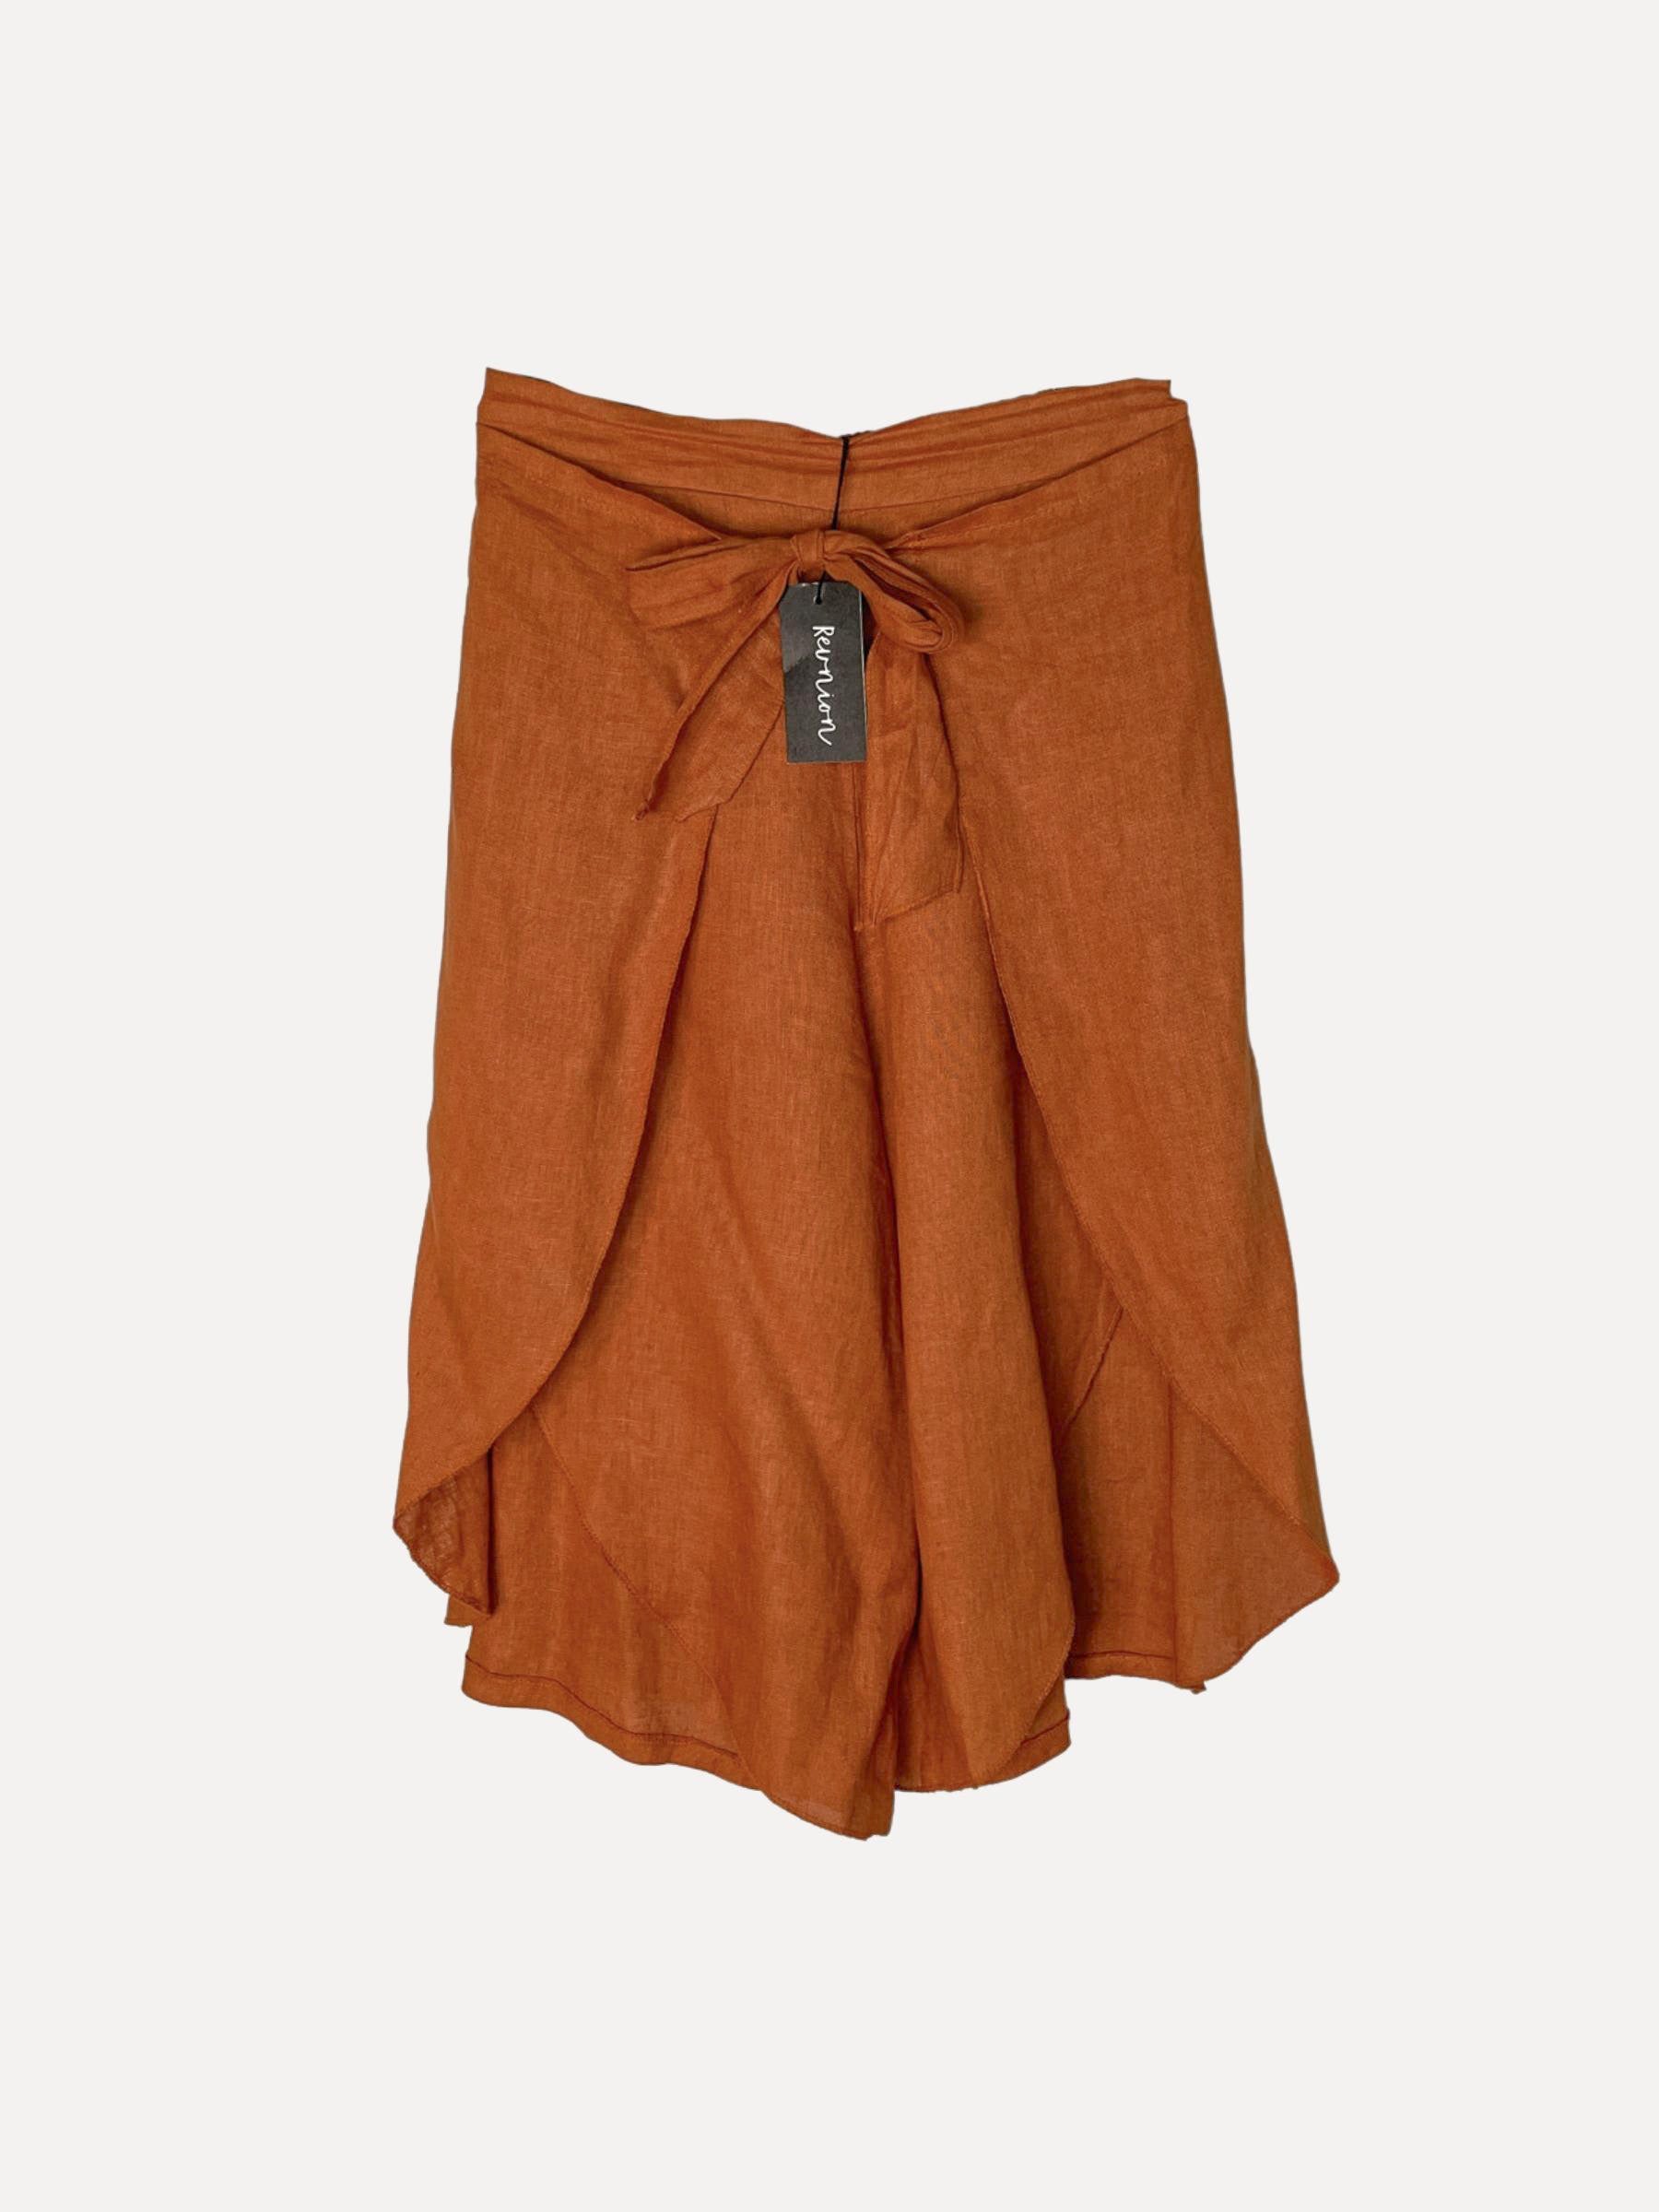 Orchid Linen Shorts, Sepia Brown